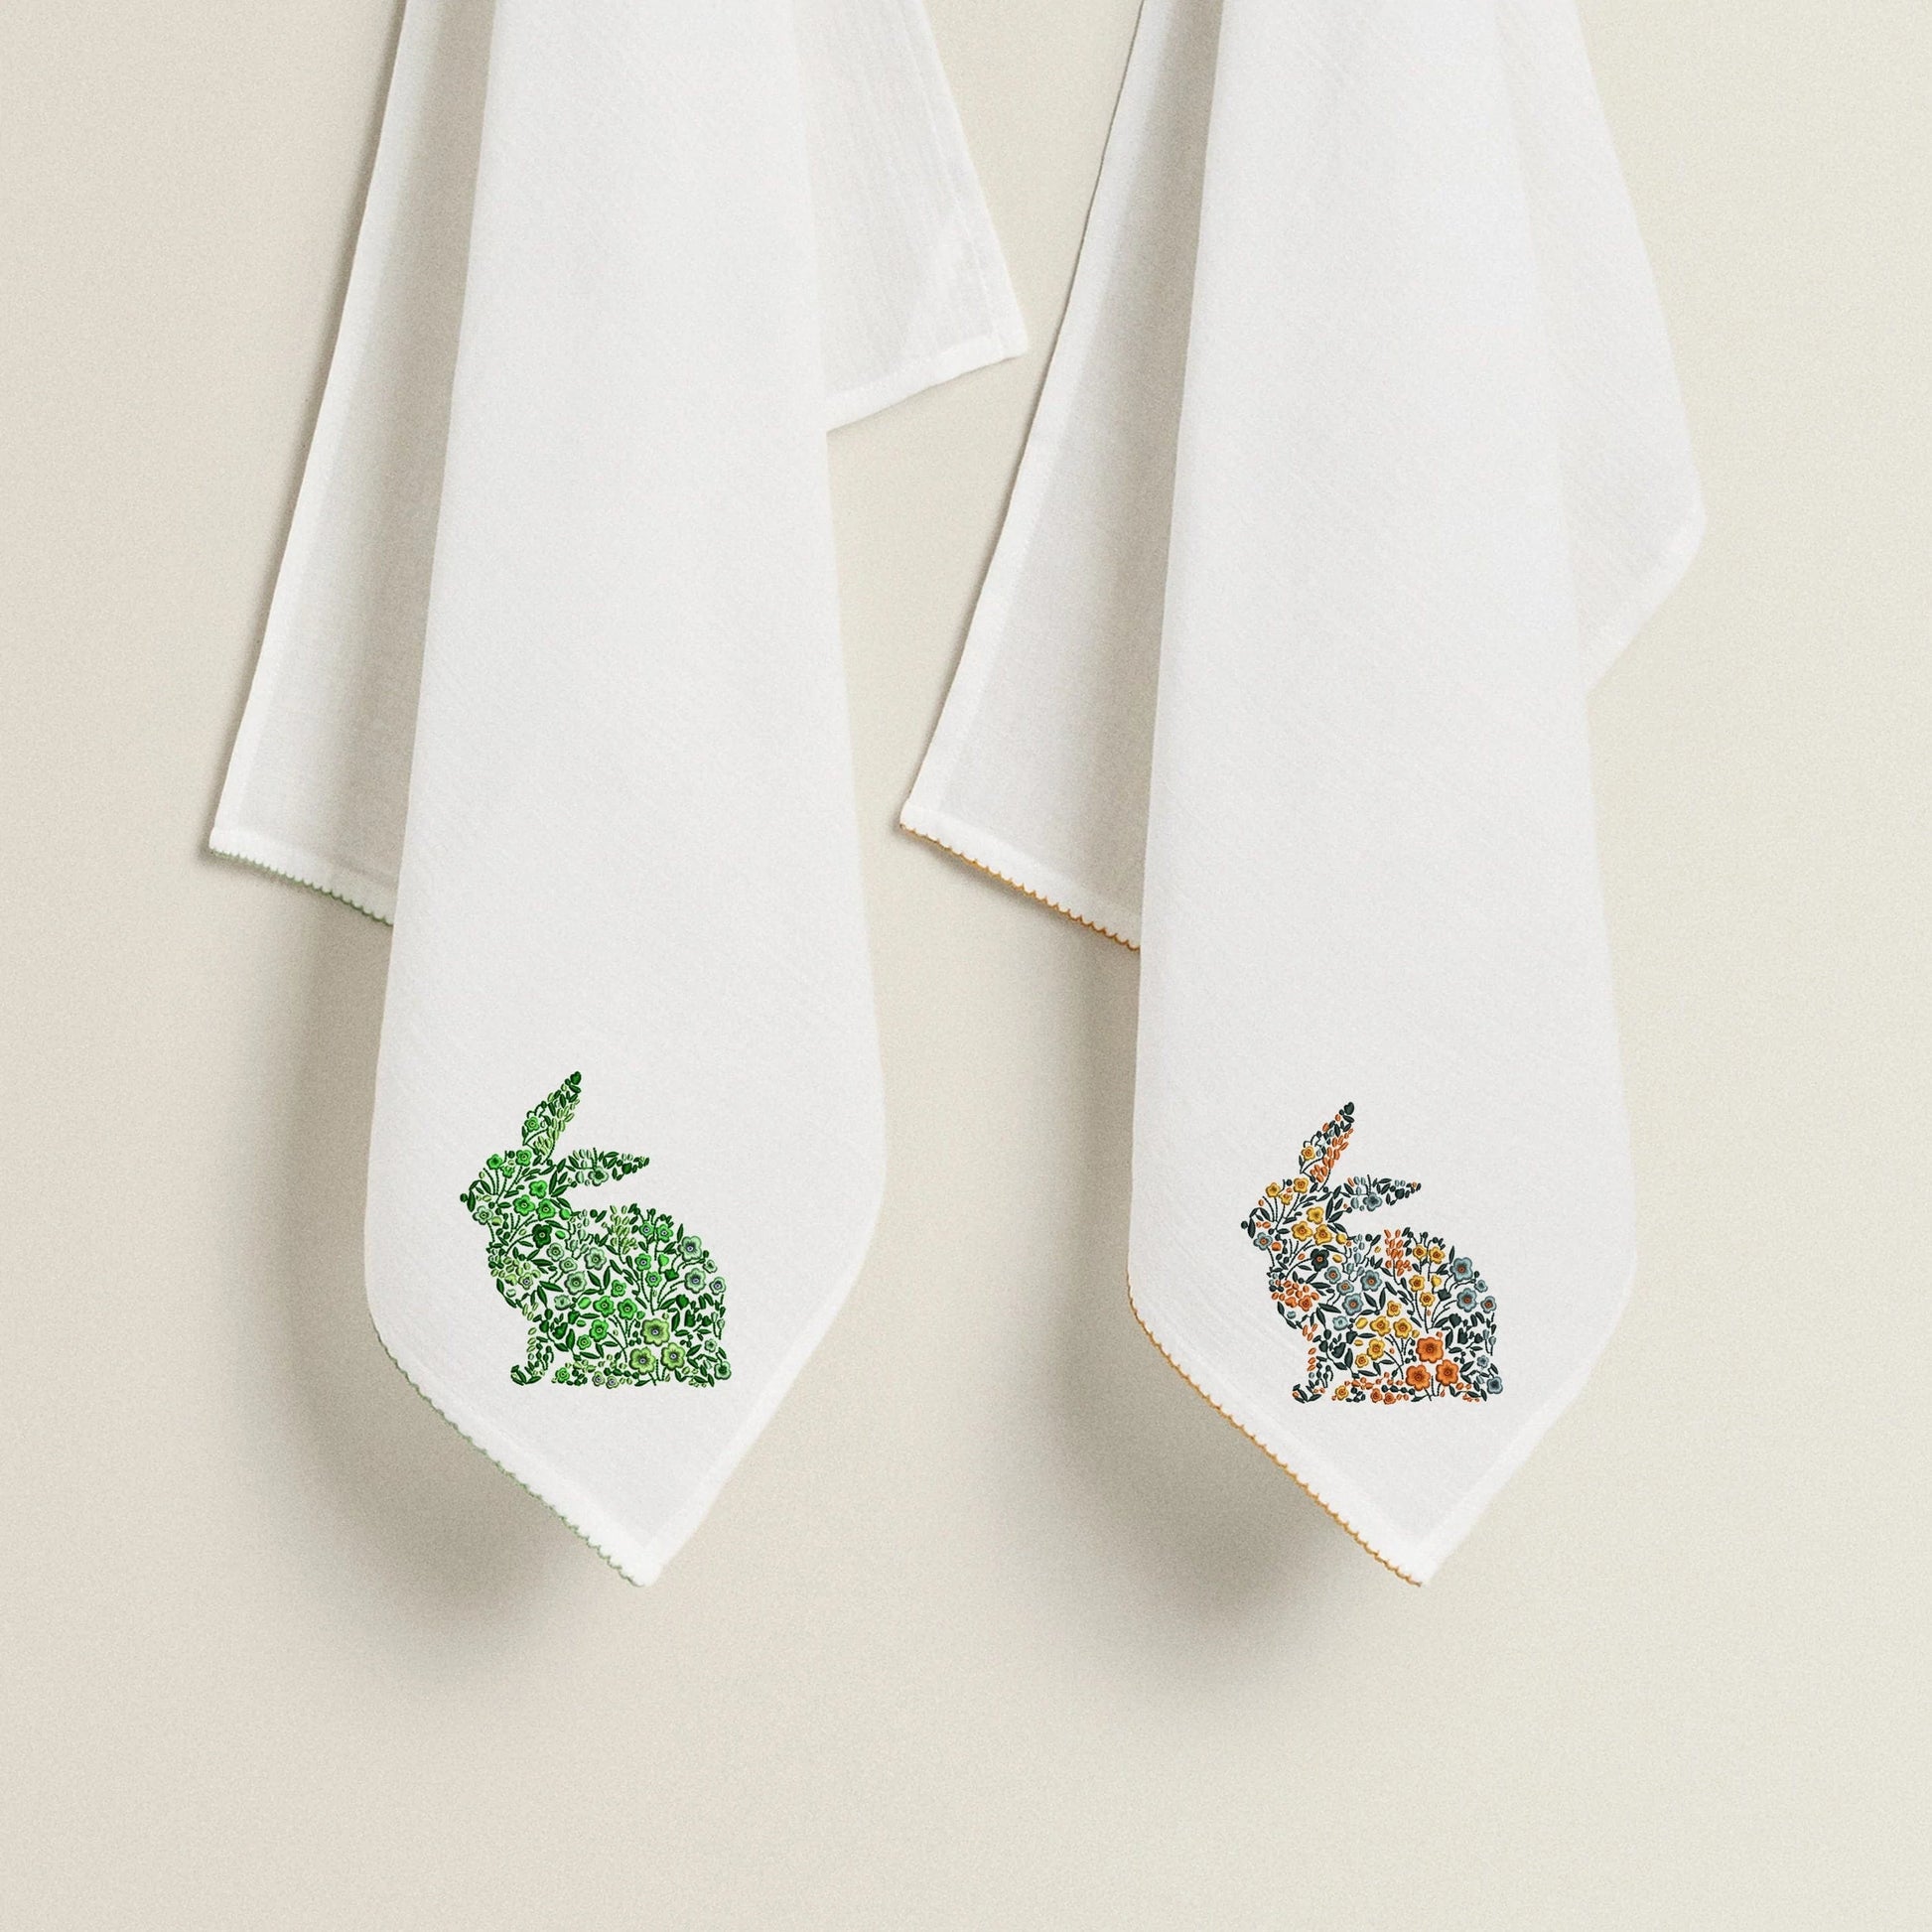 Easter Flower Bunny Machine Embroidery Design on towel